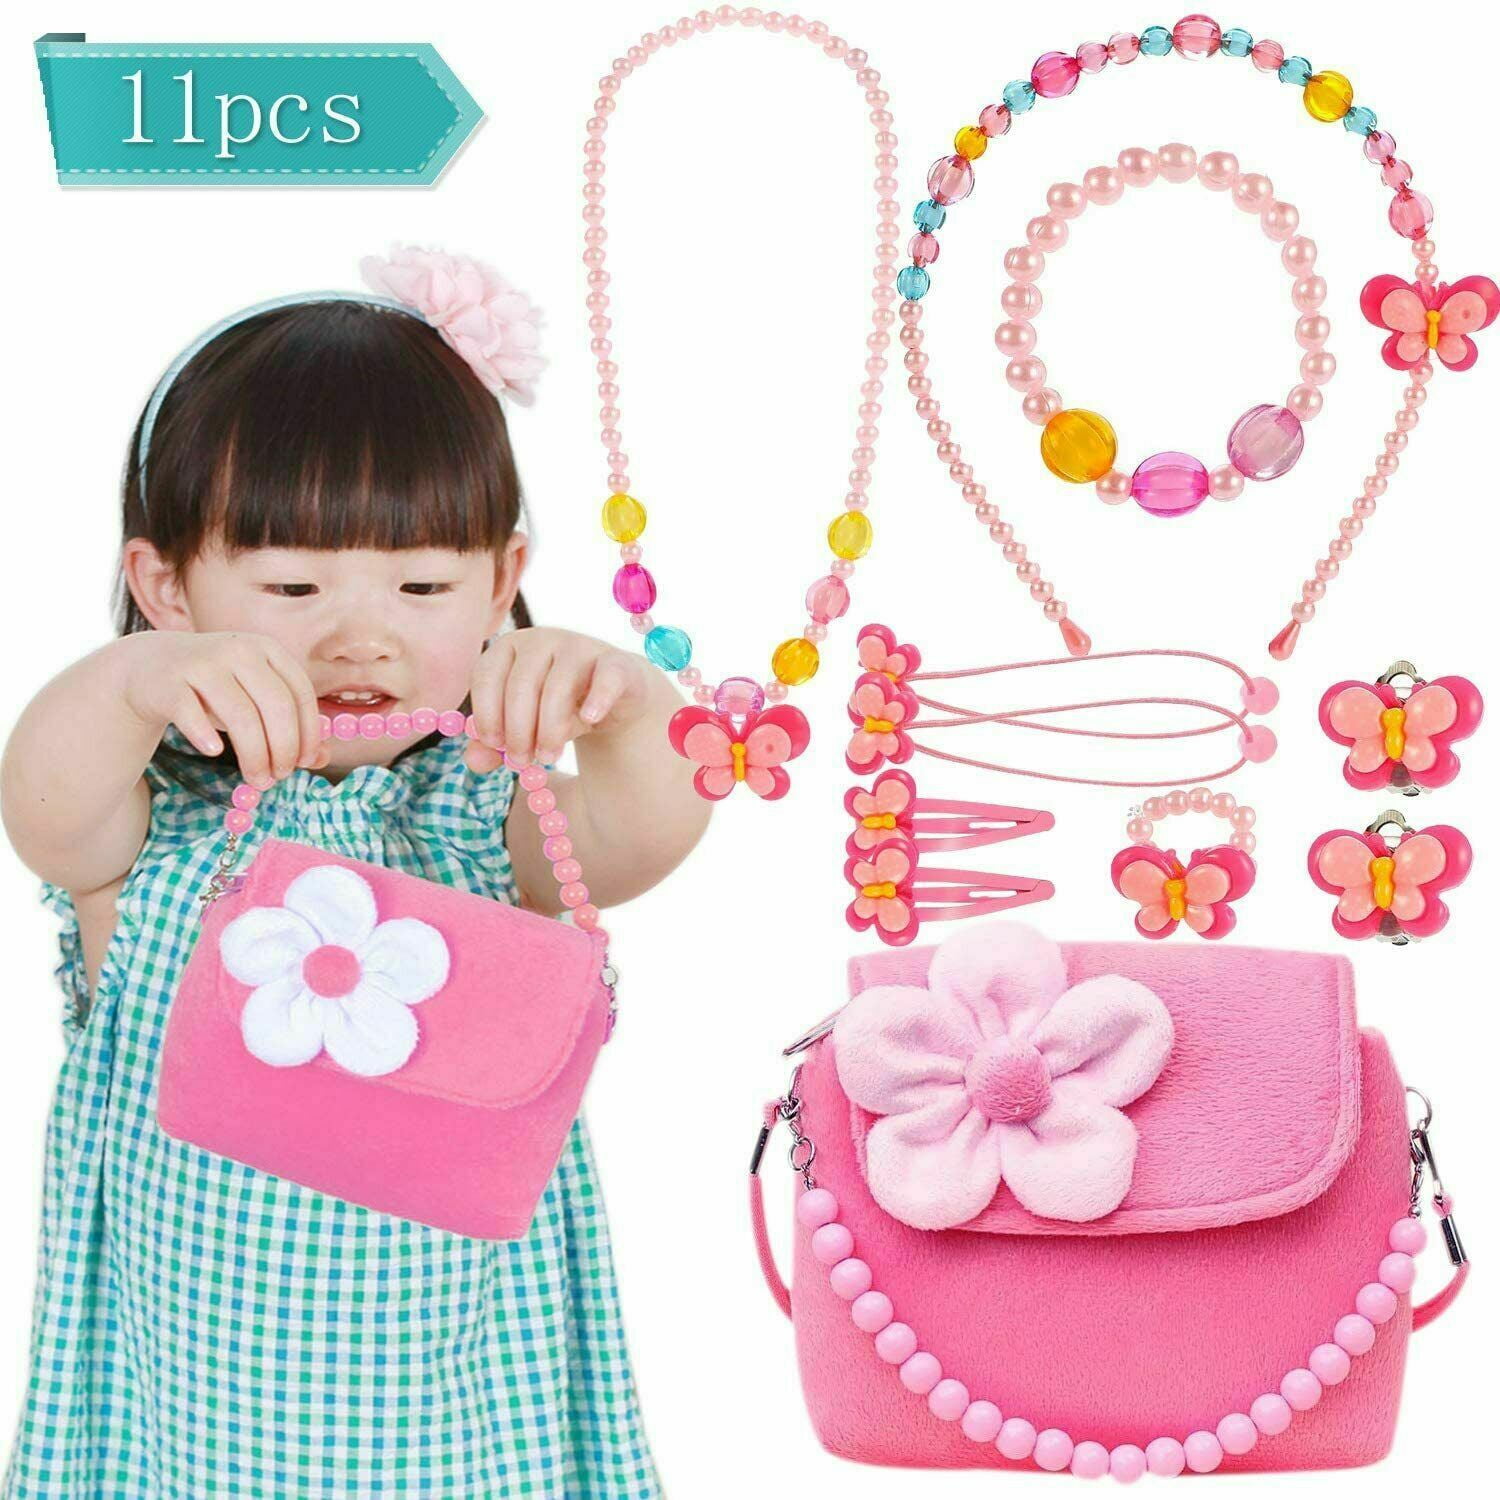 Luv Her Girls Jewelry Set 3 Piece Princess Toys | Jewelry Set with Beaded Necklace for Gilrs - Toddler Bracelets and Girls Ring | Toddler Girl Toys | Kids